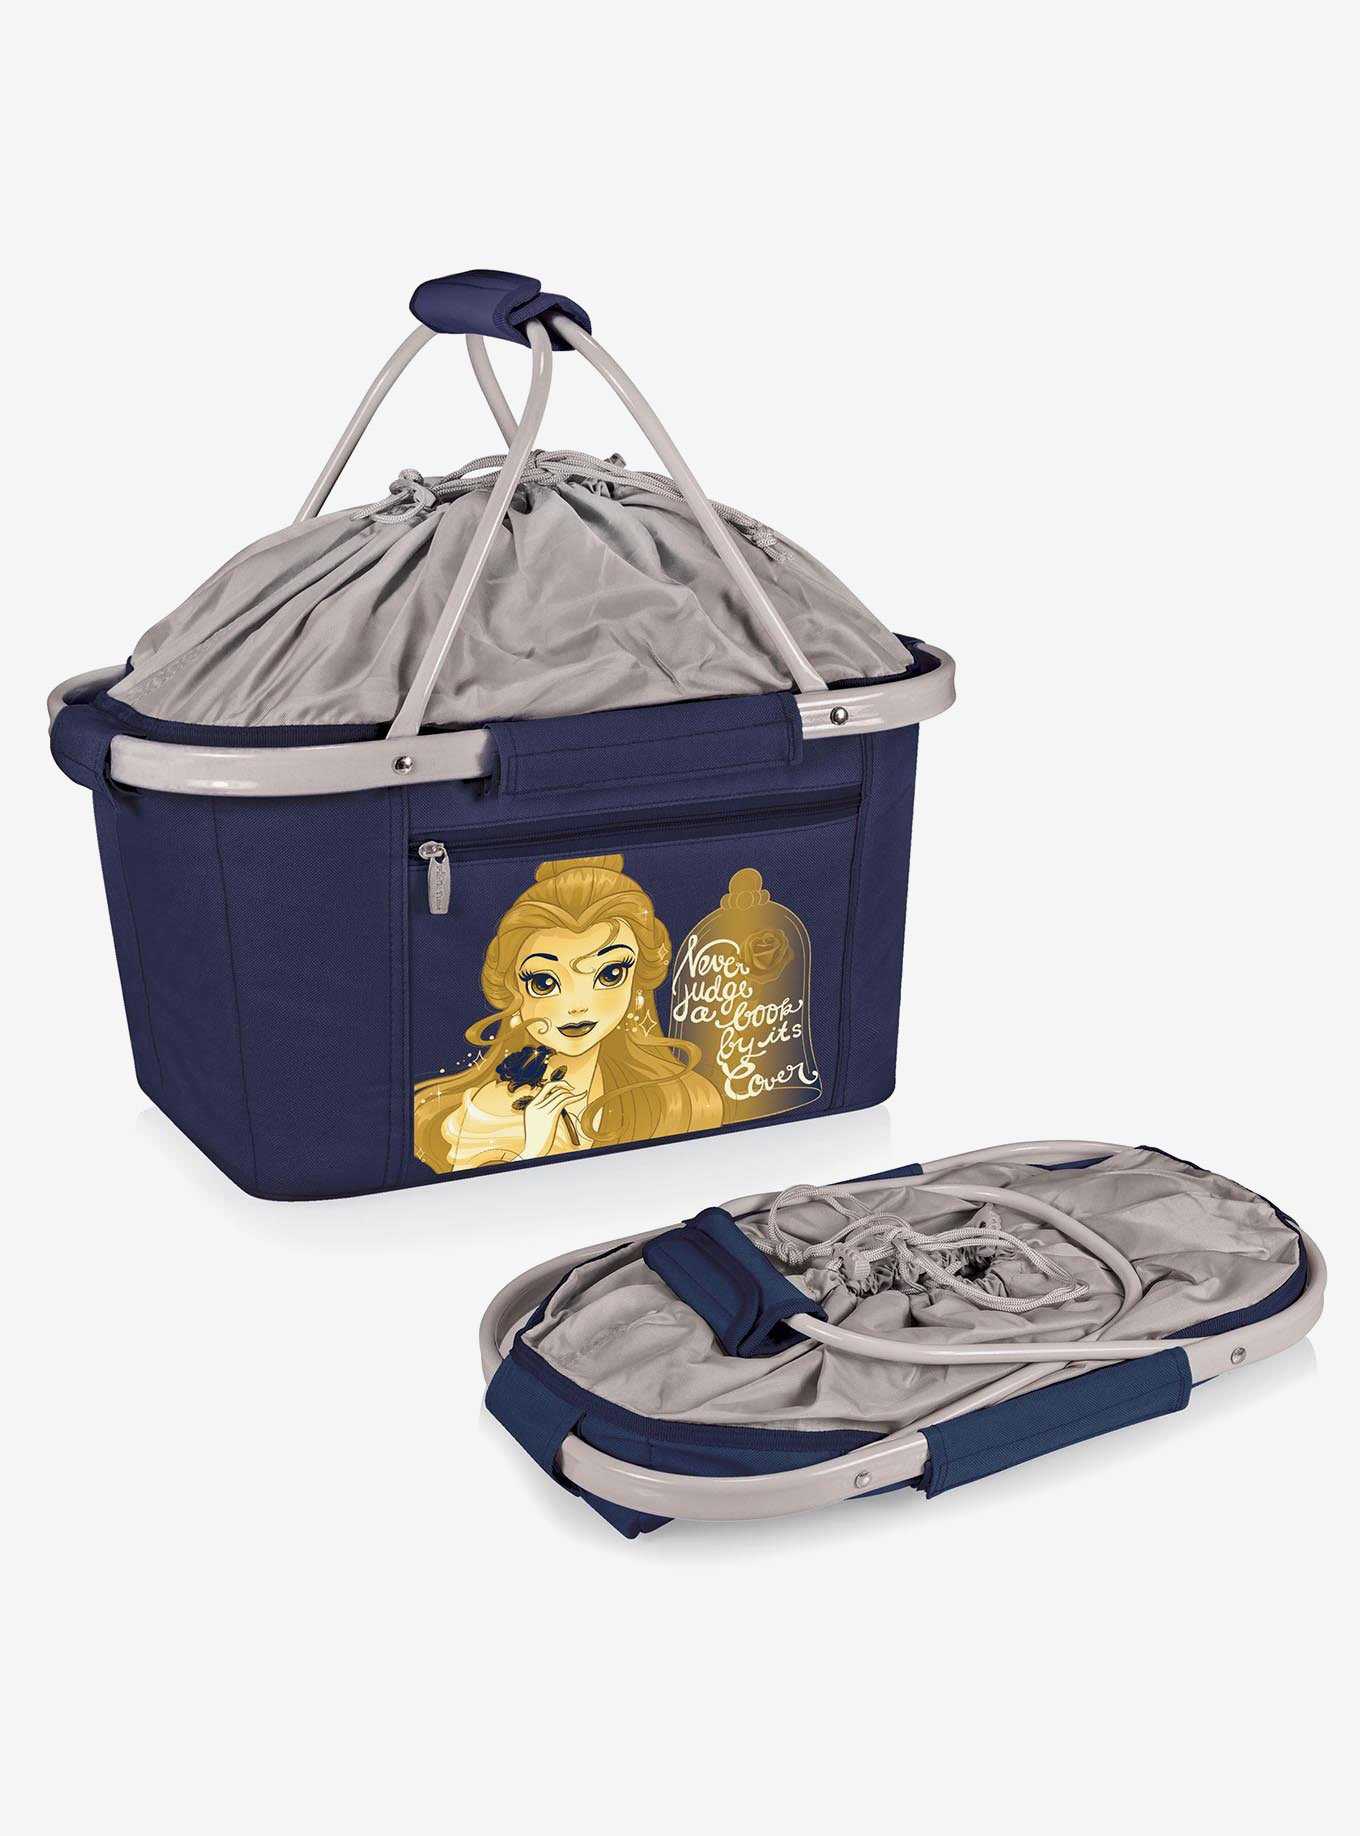 Disney Beauty & the Beast Collapsible Cooler Tote Basket, , hi-res